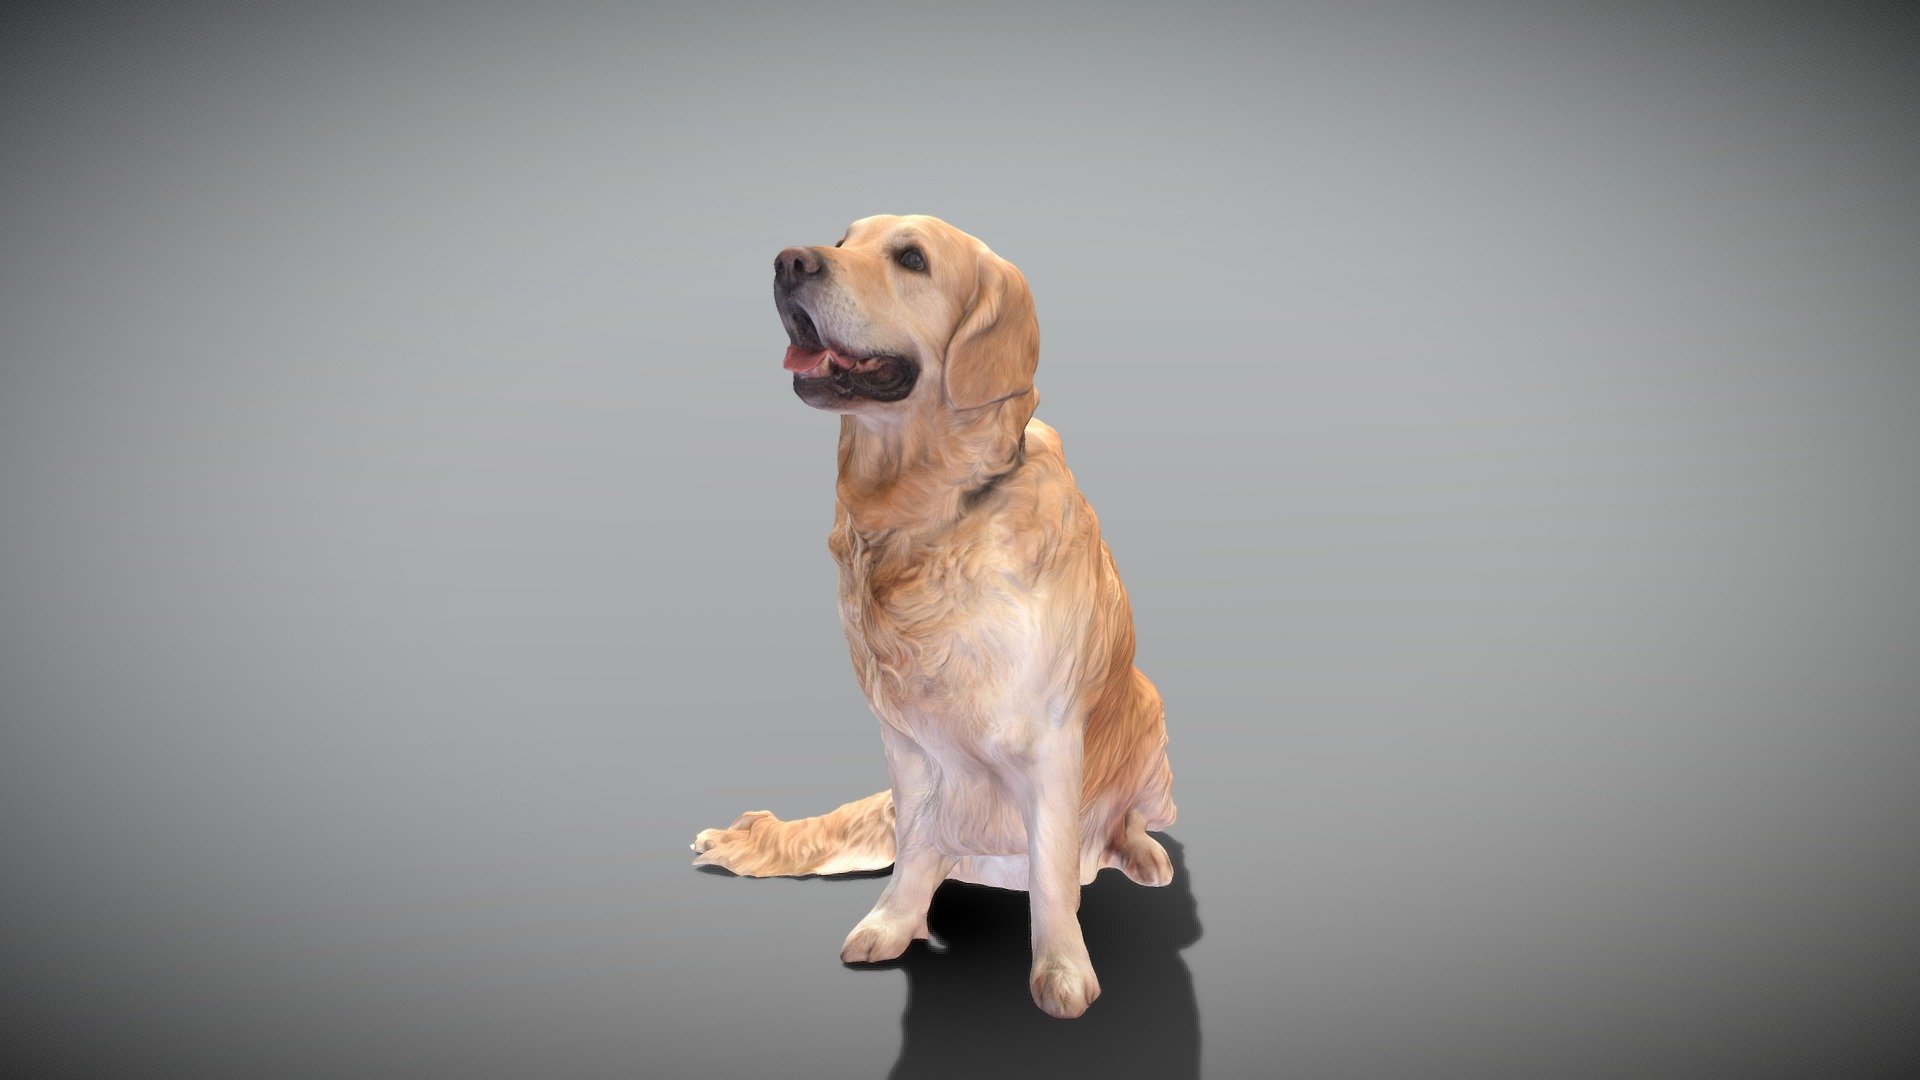 This is a true sized and highly detailed model of a young charming Golden retriever dog. It will add life and coziness to any architectural visualisation of houses, playgrounds, parques, urban landscapes, etc. 

The product is ready both for immediate use in architectural visualisations, or further render and detailed sculpting in Zbrush.

Technical specifications:




digital double 3d scan model

150k &amp; 30k triangles | double triangulated

high-poly model (.ztl tool with 4-5 subdivisions) clean and retopologized automatically via ZRemesher

sufficiently clean

PBR textures 8K resolution: Diffuse, Normal, Specular maps

non-overlapping UV map

no extra plugins are required for this model

Download package includes a Cinema 4D project file with Redshift shader, OBJ, FBX, STL files, which are applicable for 3ds Max, Maya, Unreal Engine, Unity, Blender, etc. All the textures you will find in the “Tex” folder, included into the main archive.

3D EVERYTHING - Golden retriever dog 23 - Buy Royalty Free 3D model by deep3dstudio 3d model